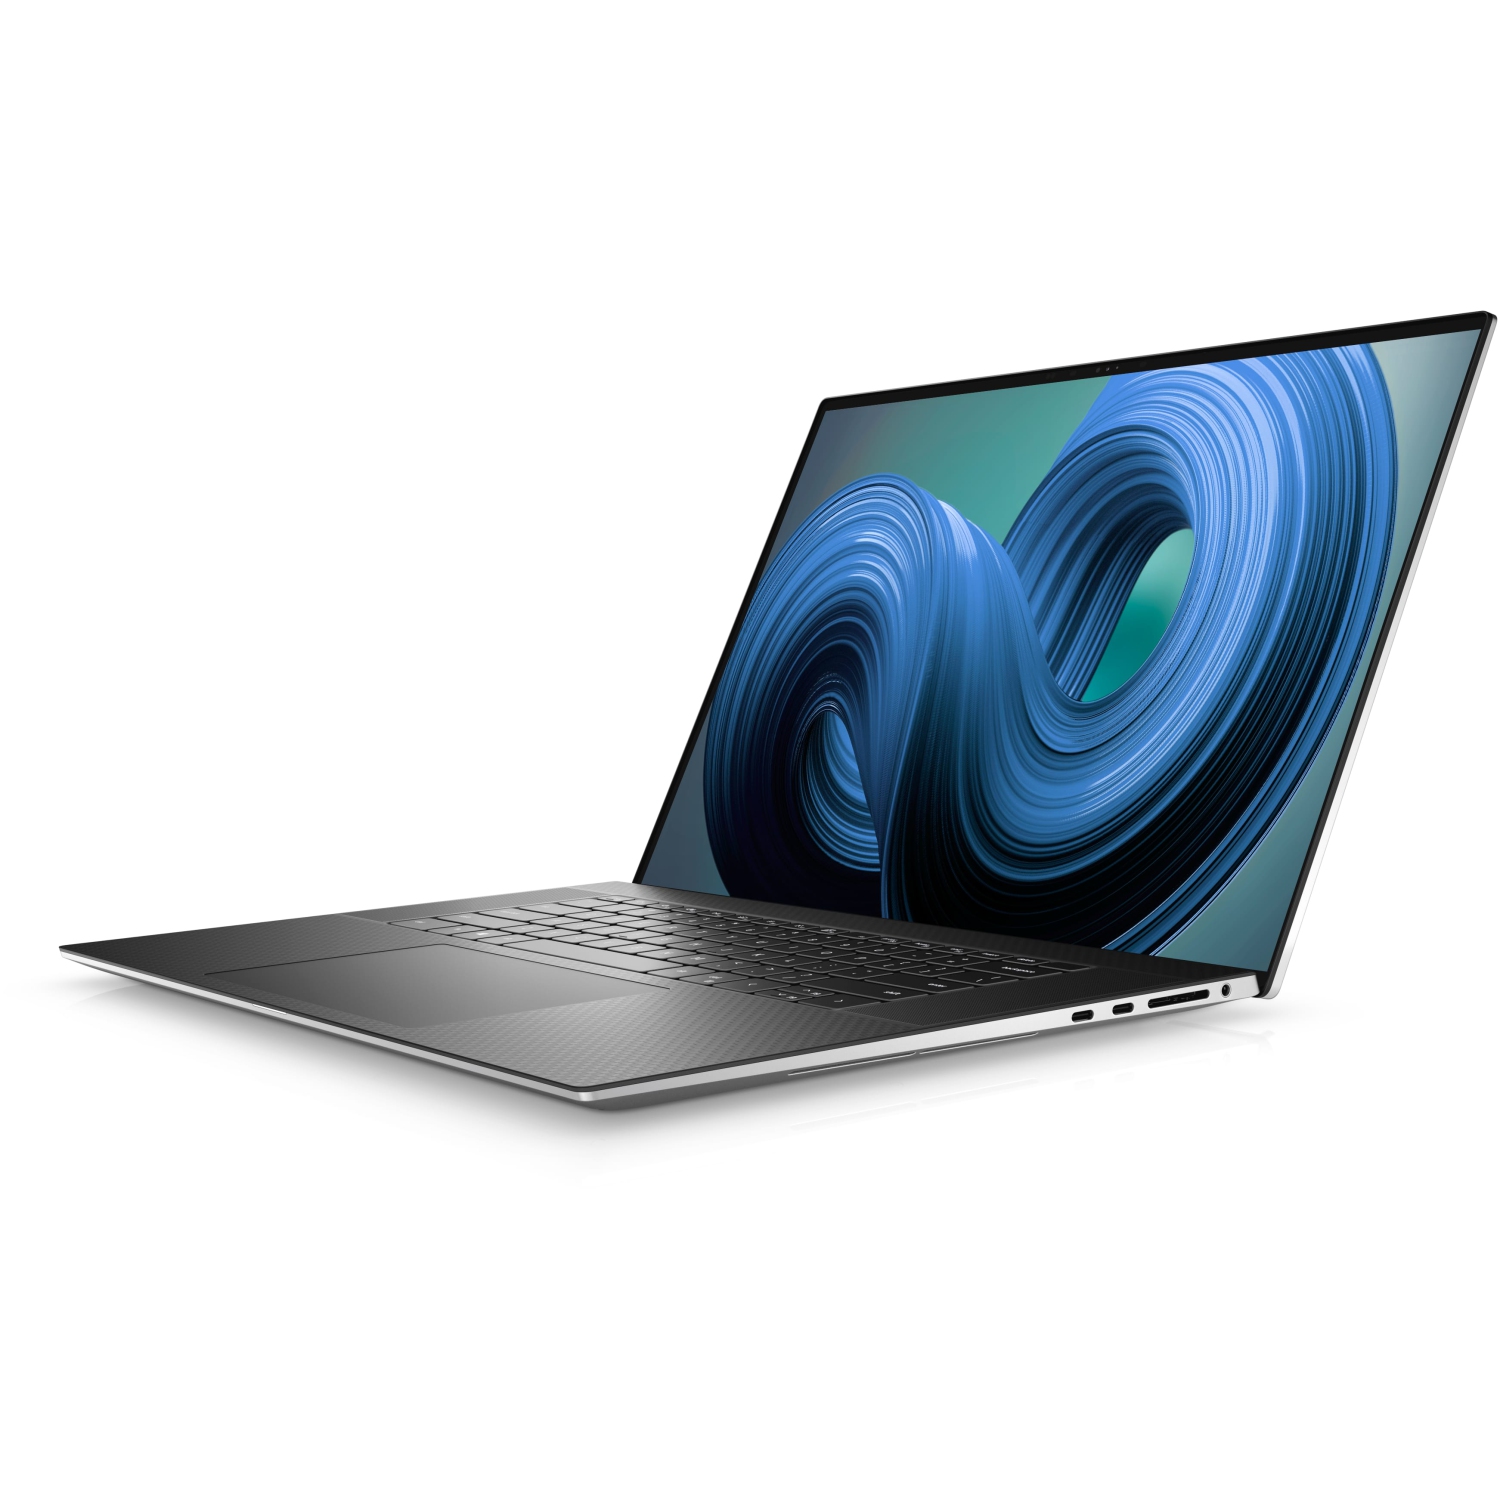 Refurbished (Excellent) – Dell XPS 9720 Laptop (2022) | 17" 4K Touch | Core i7 - 8TB SSD - 16GB RAM - RTX 3050 | 14 Cores @ 4.7 GHz - 12th Gen CPU